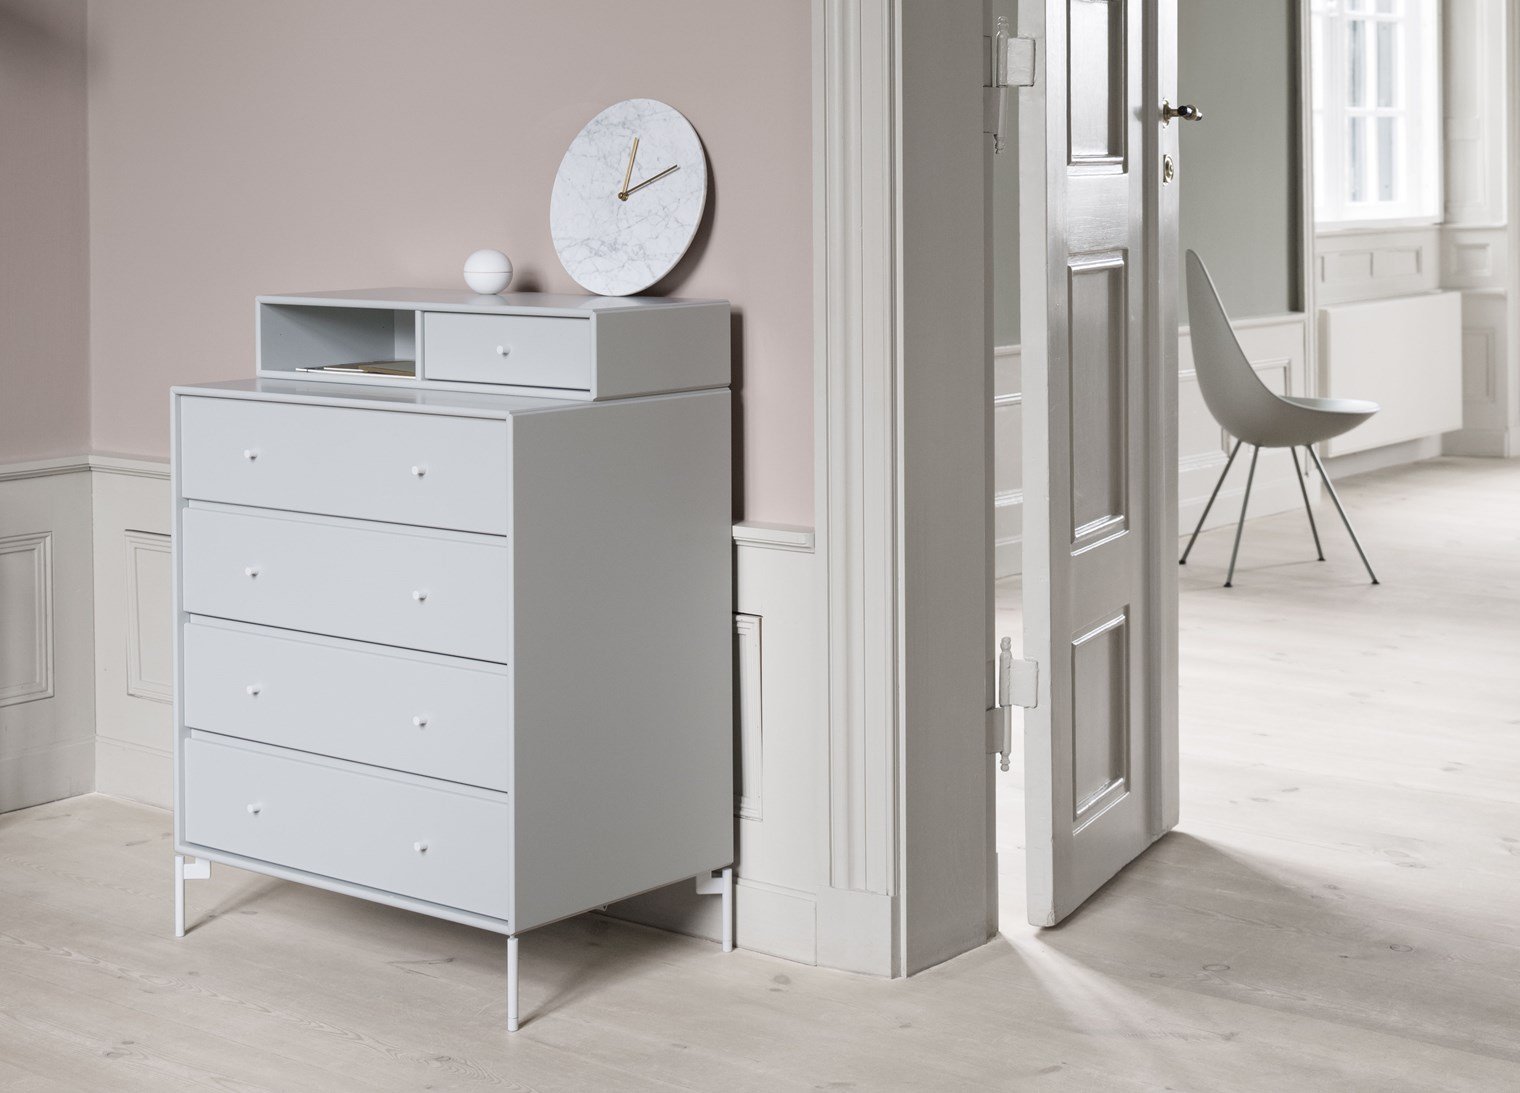 Montana Keep Bre of Drawers med 7 cm piedestal, dimma